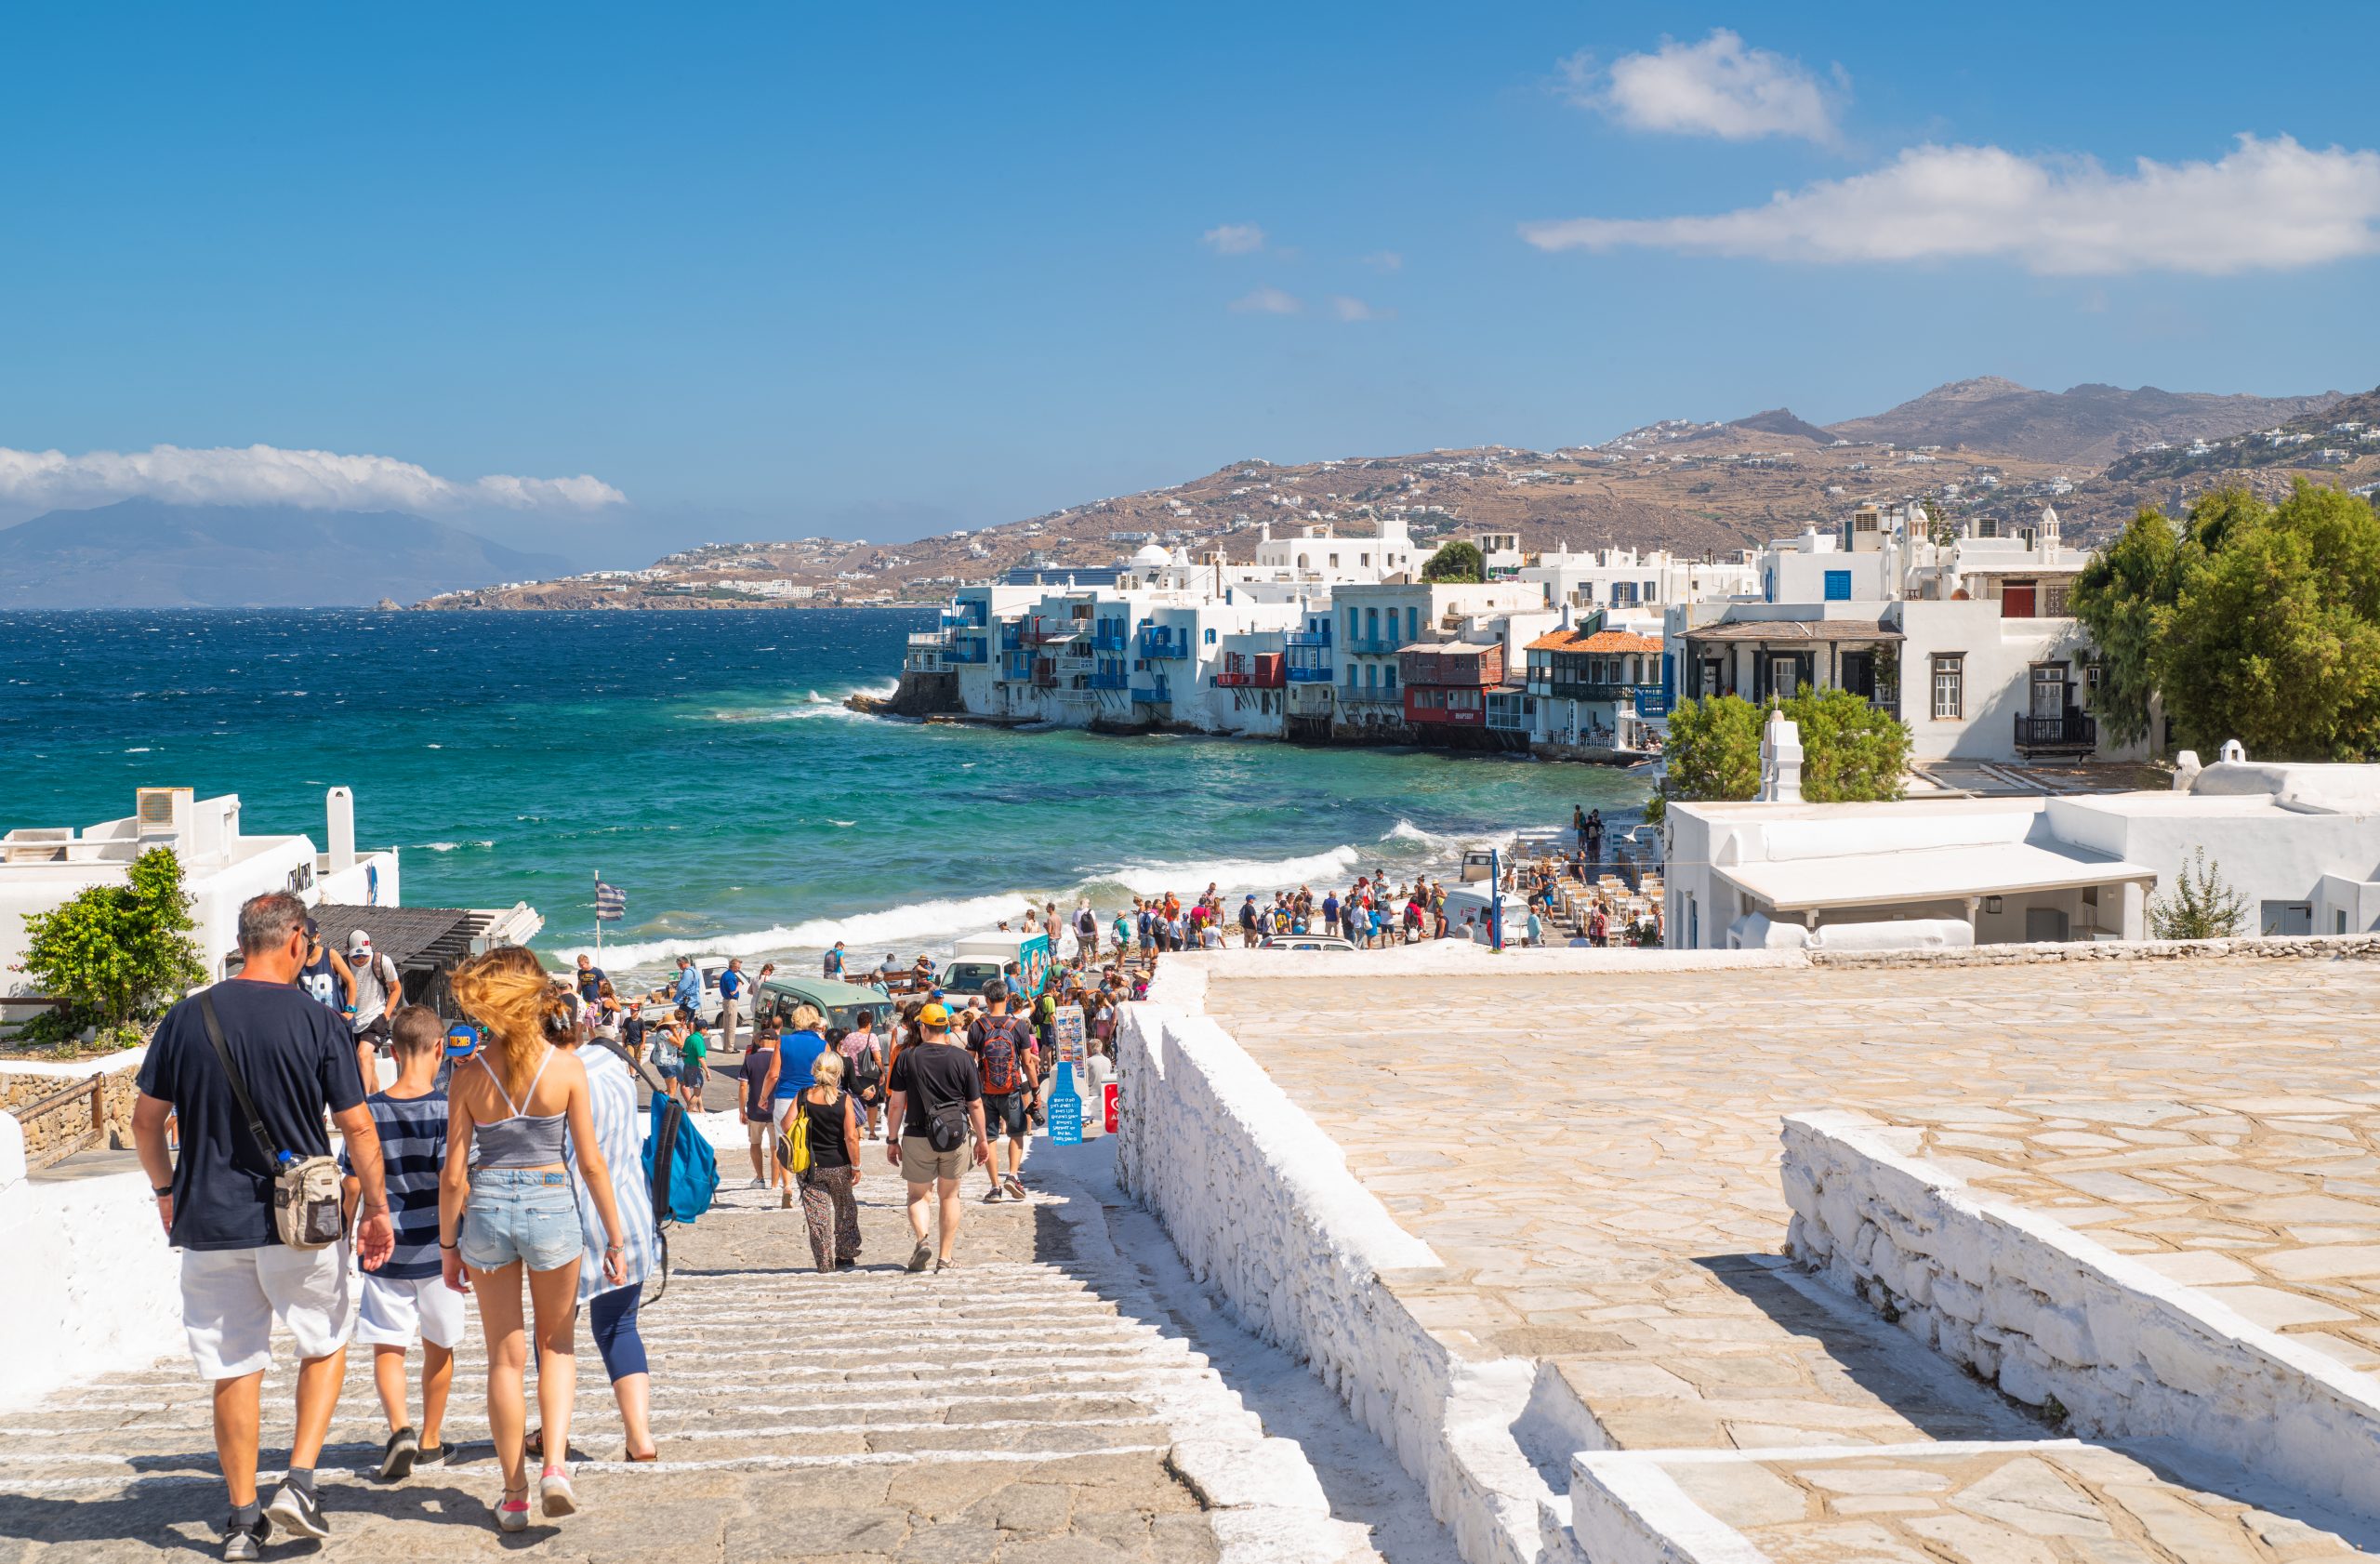 Airbnb: Bookings for the summer are taking off – Greece top among 20 European countries